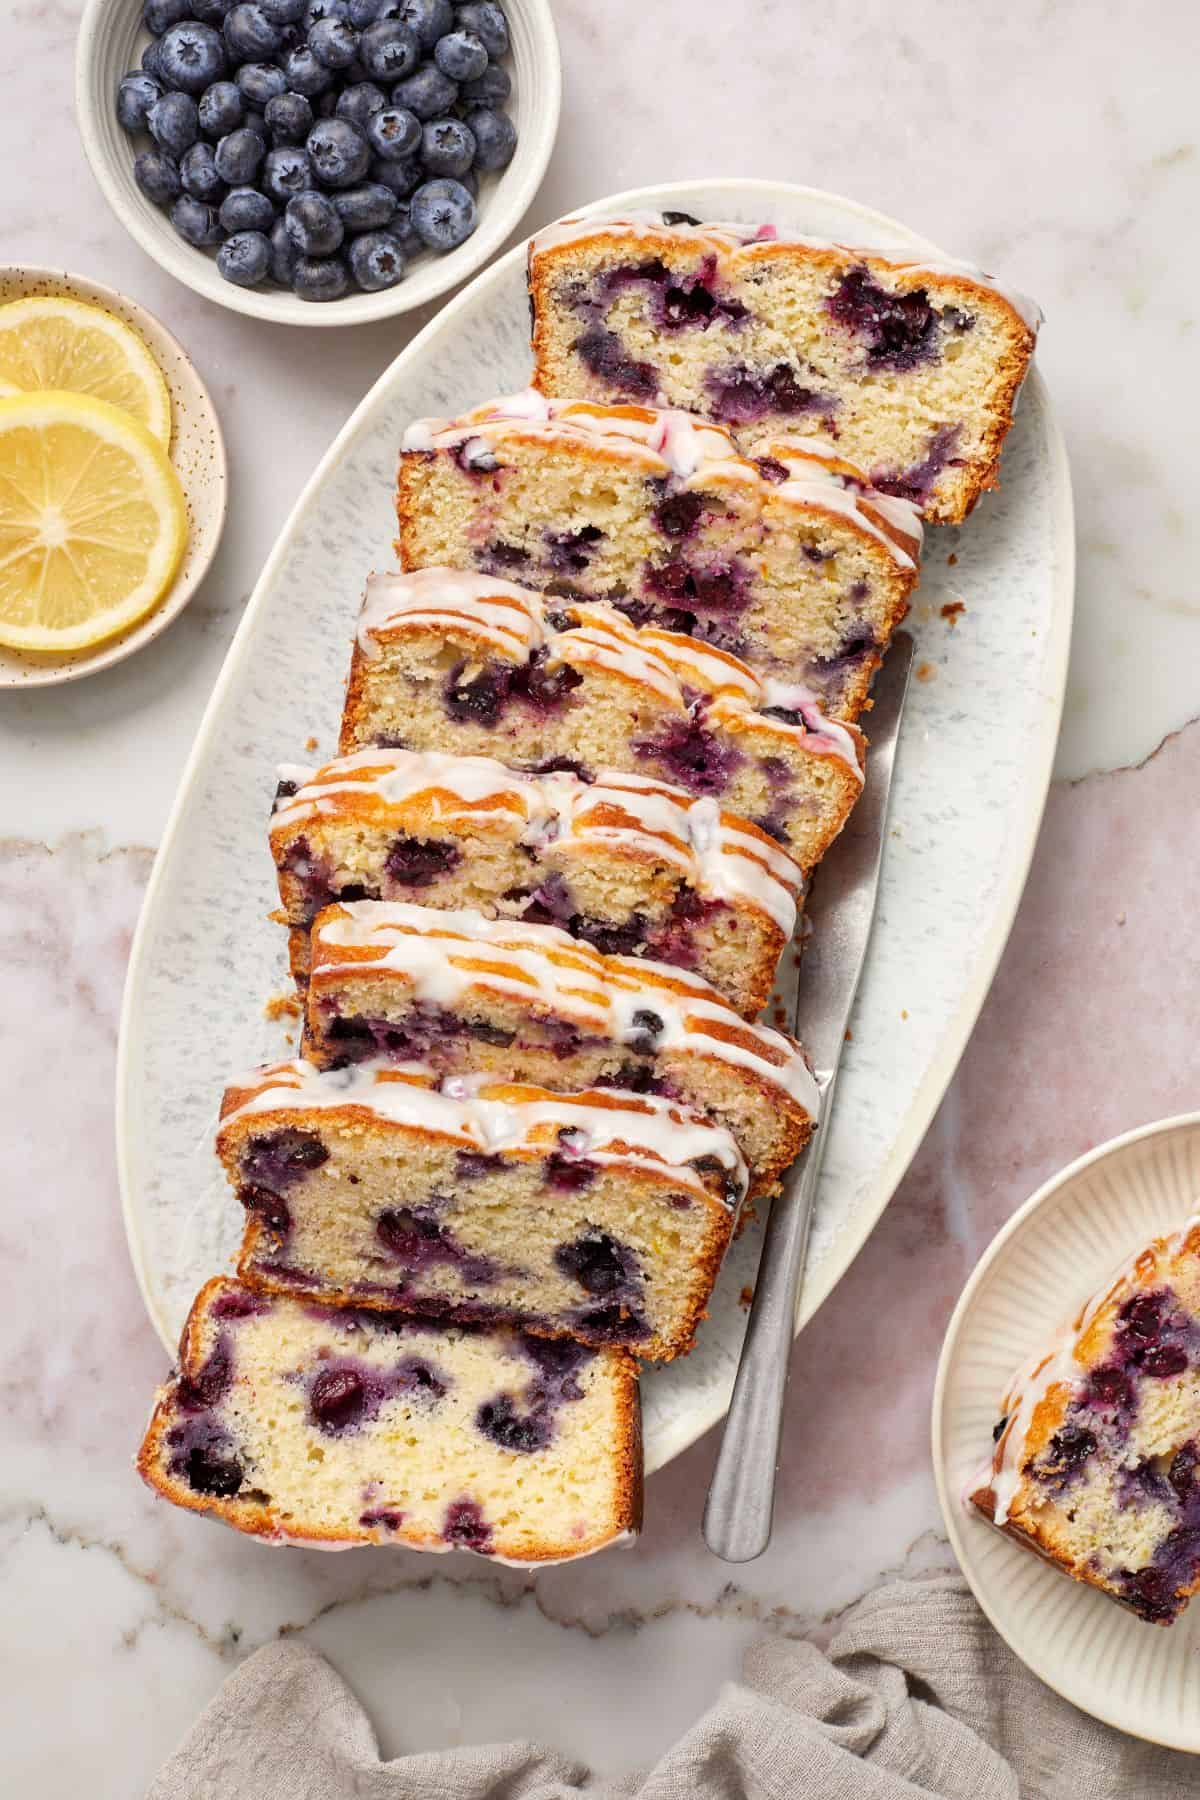 Slices of Blueberry Loaf Cake on a white oval platter.